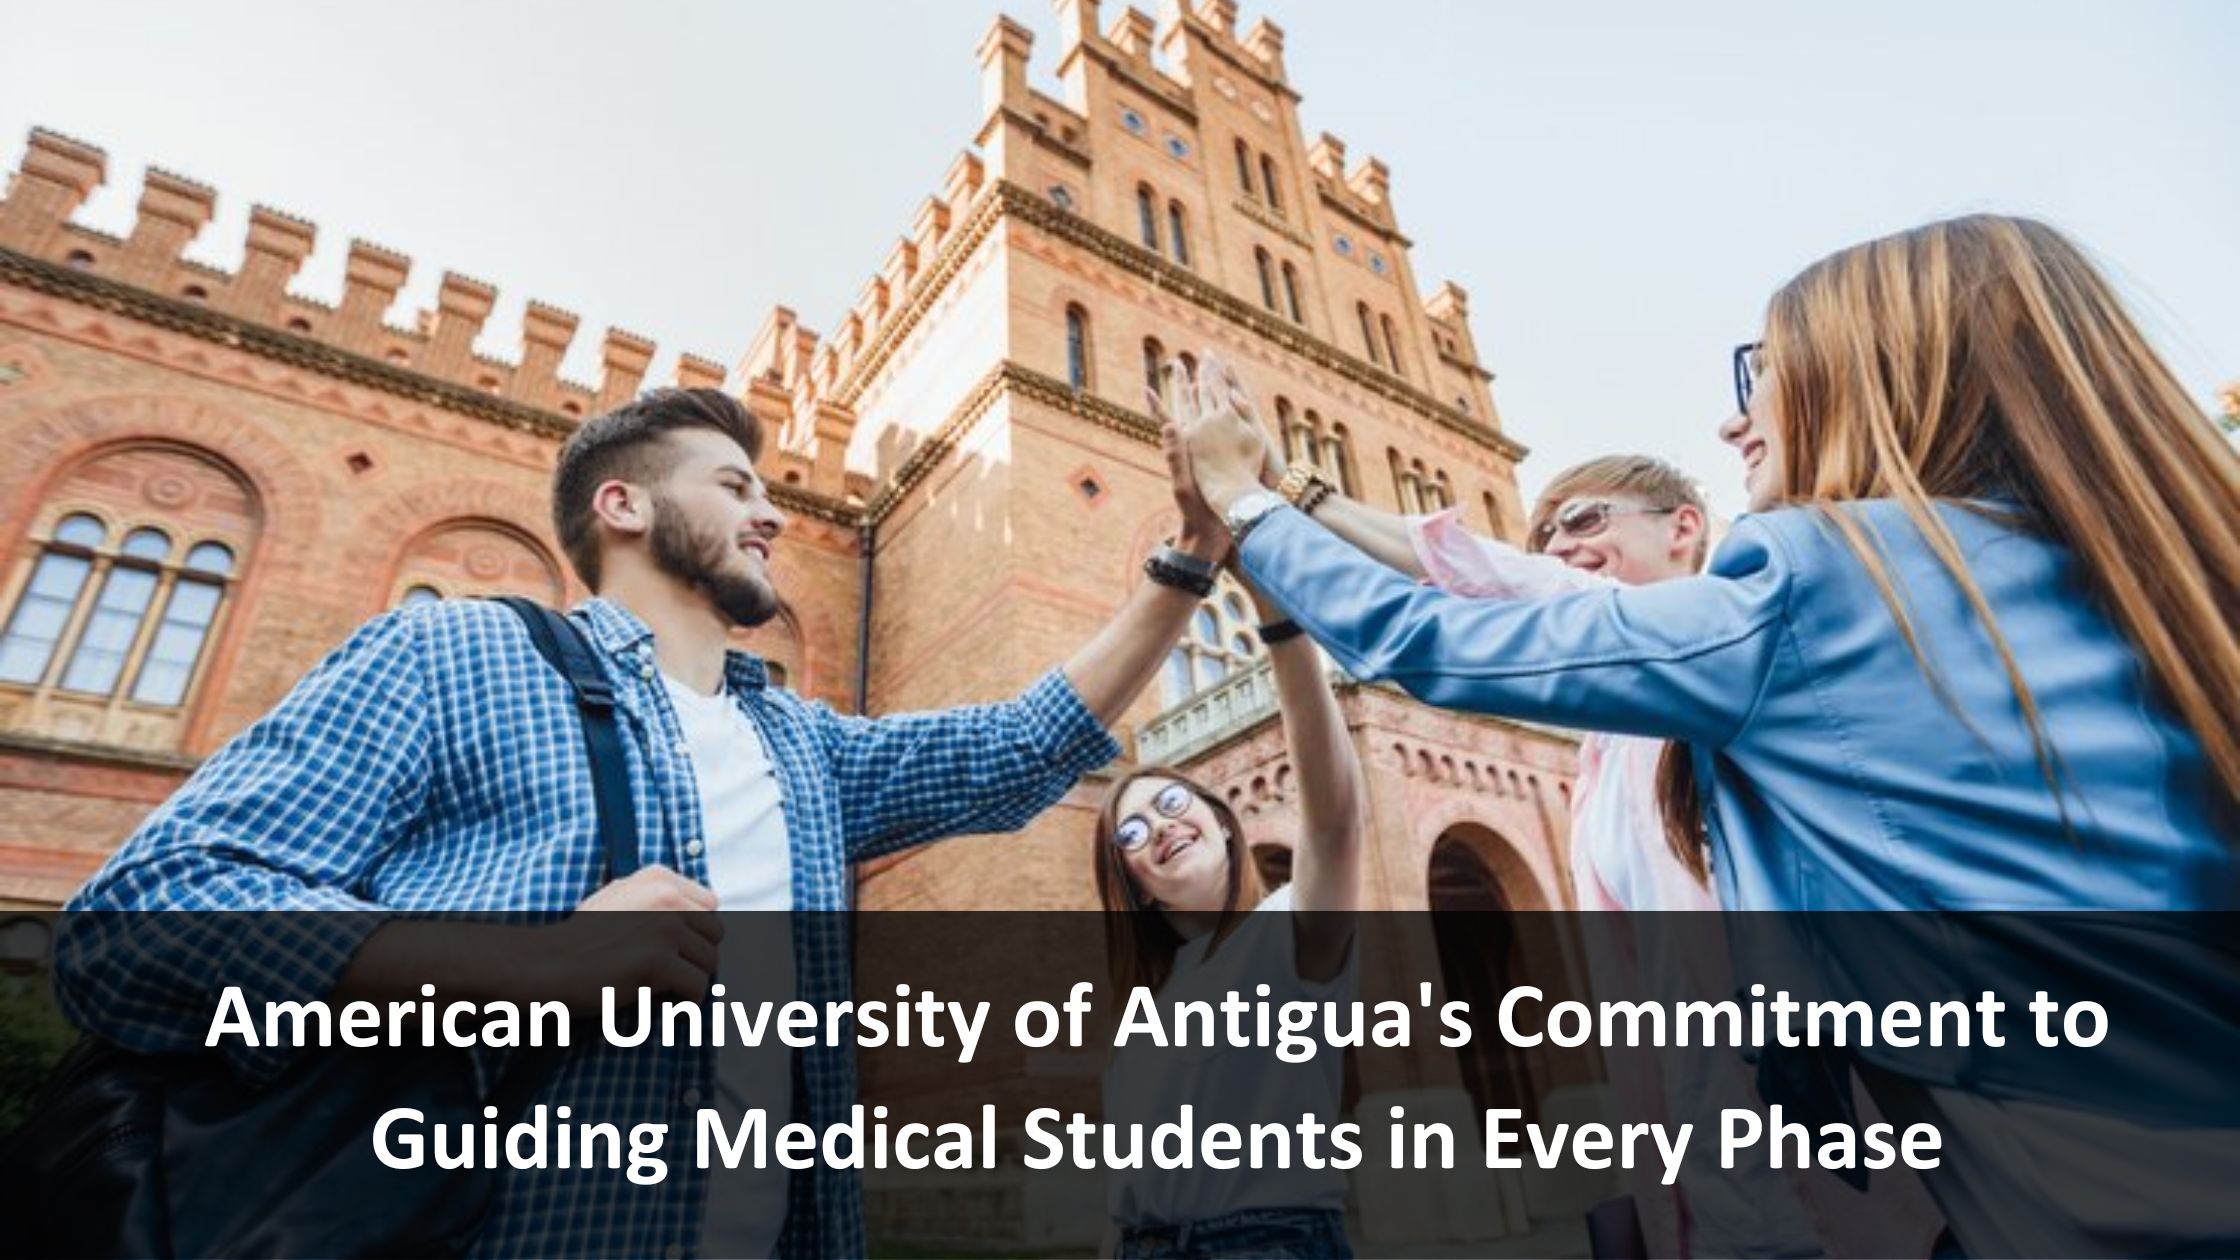 American University of Antigua's Commitment to Guiding Medical Students in Every Phase